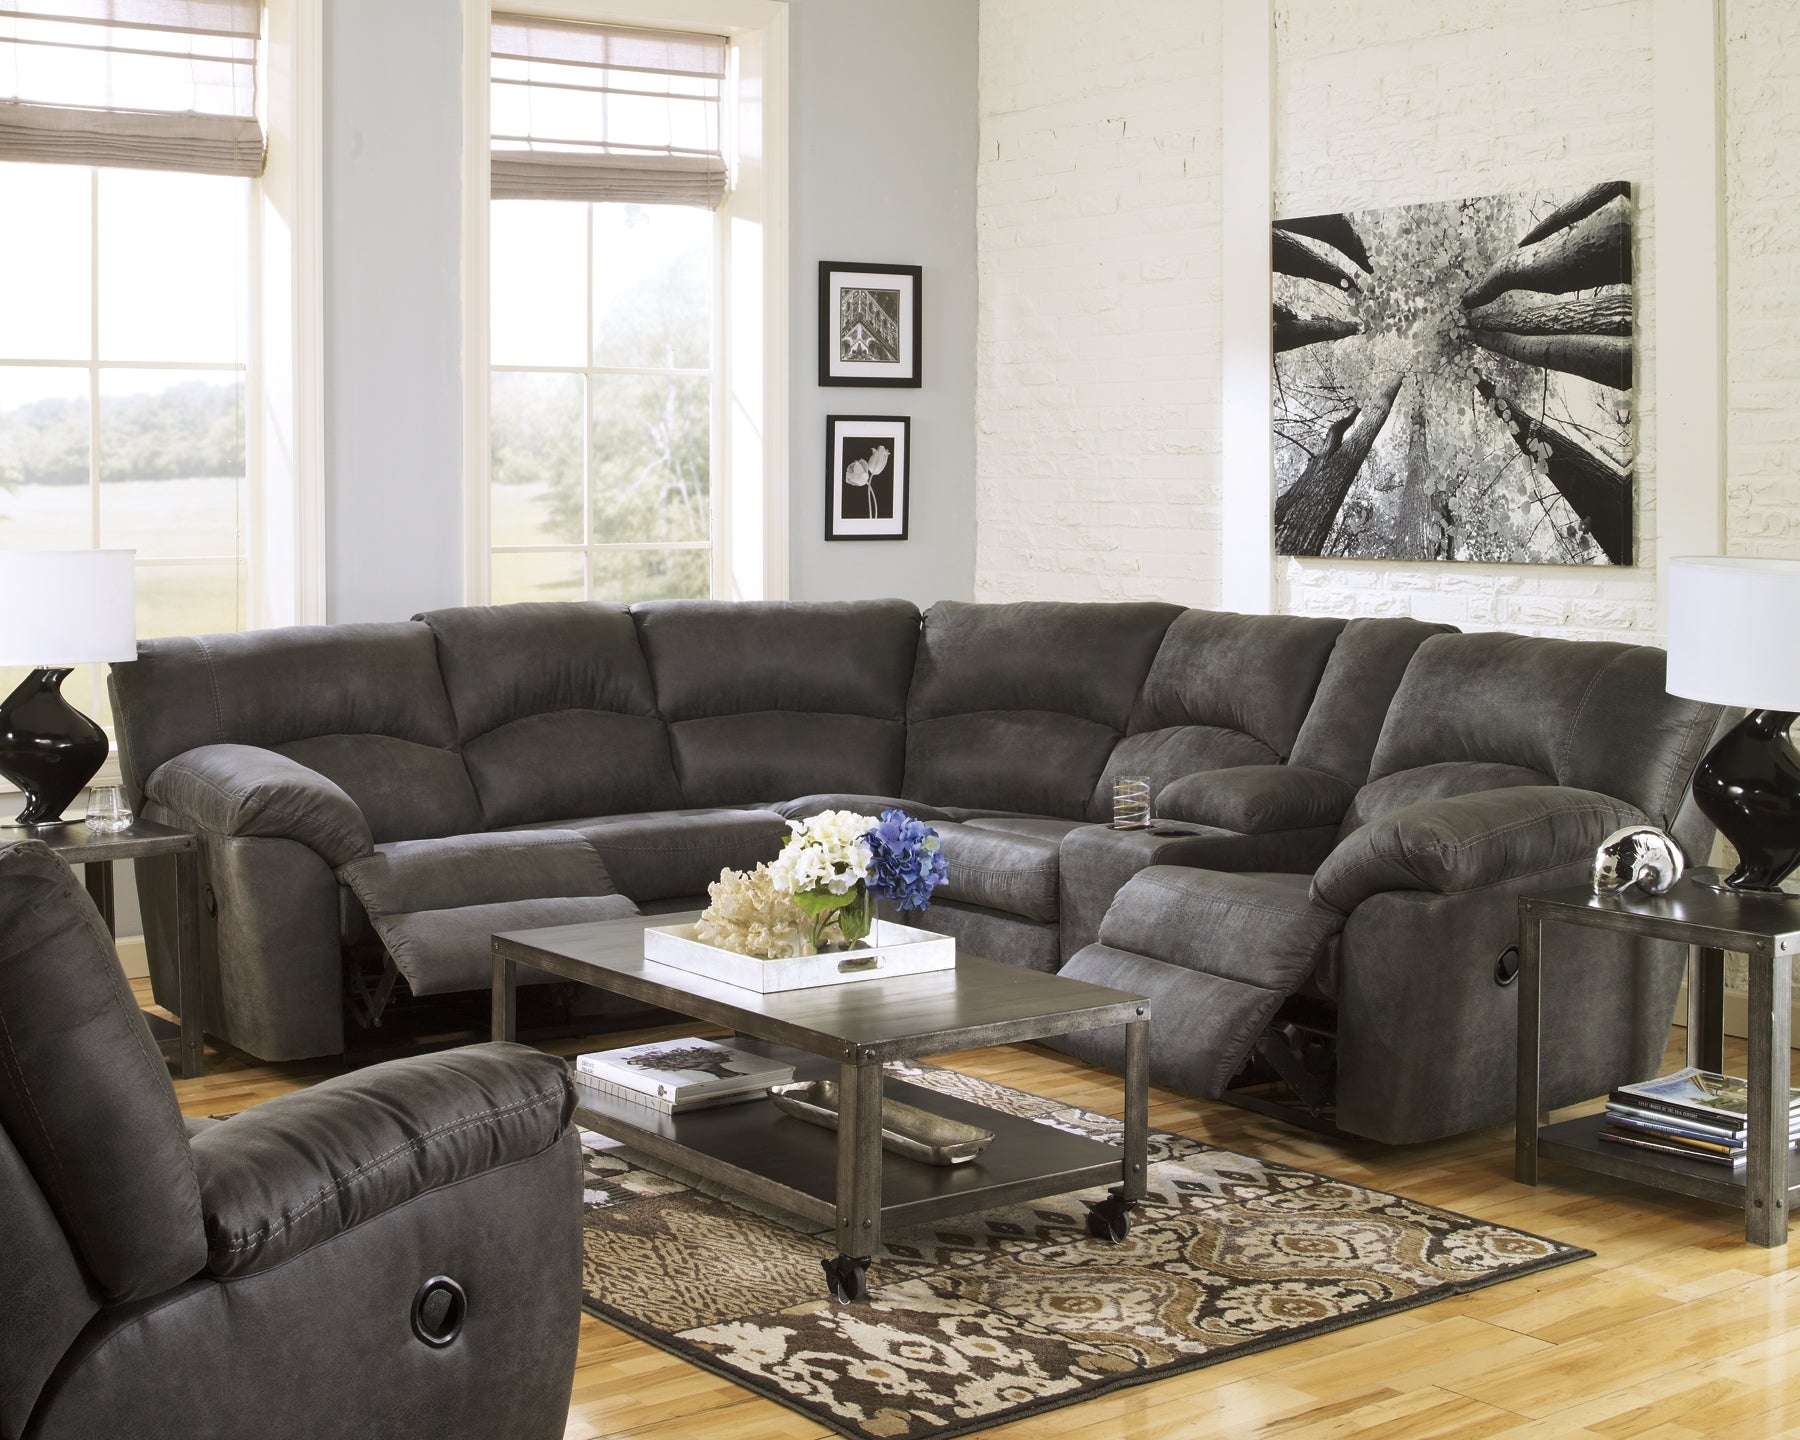 Tambo 2-Piece Reclining Sectional JB's Furniture Furniture, Bedroom, Accessories